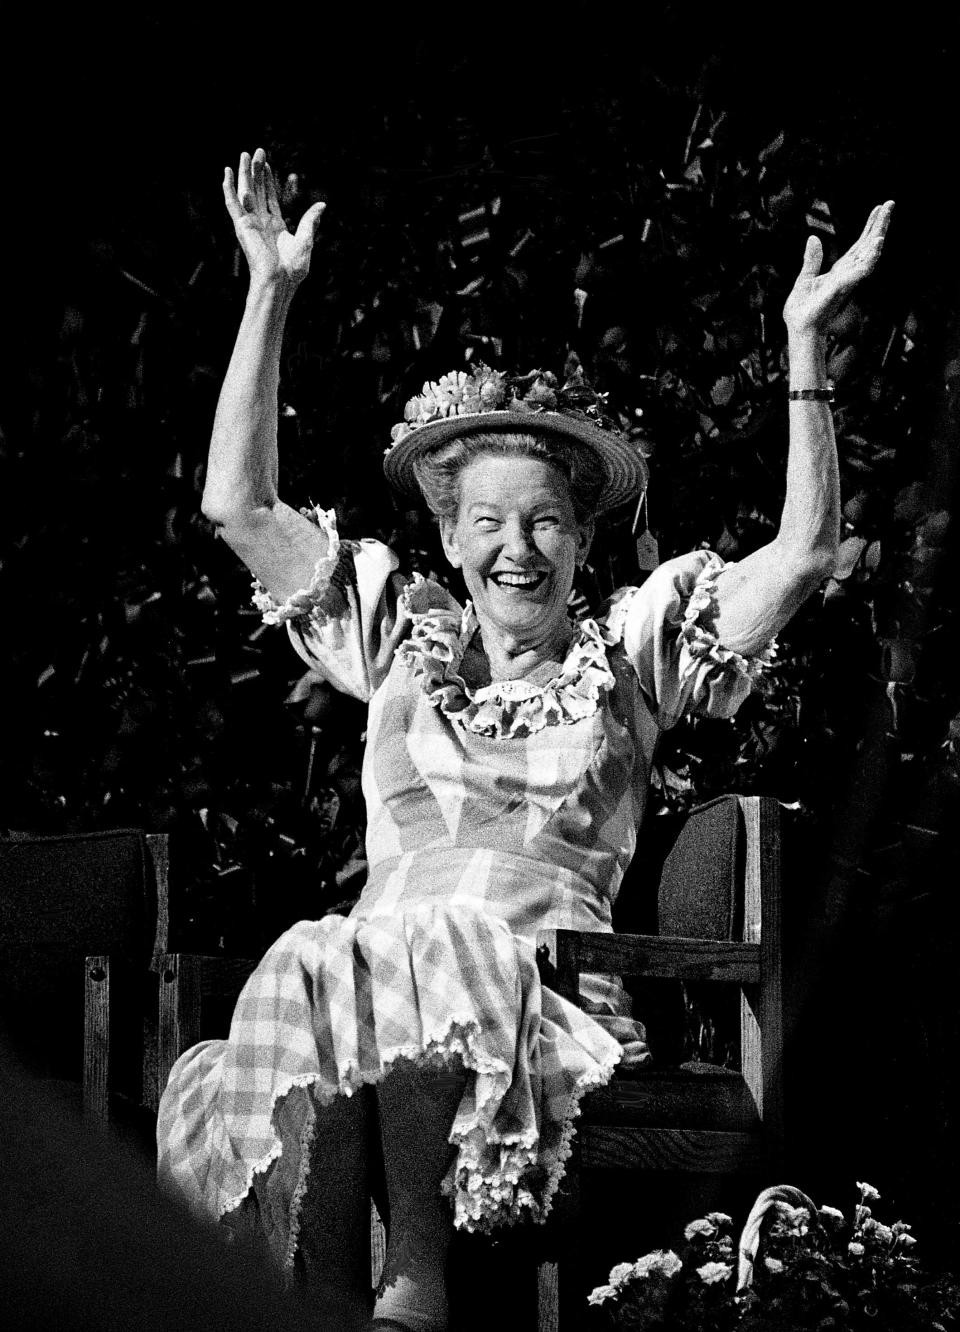 Minnie Pearl, the “Grand Lady of the Grand Ole Opry,” raises her arms after hearing praise from one of her old friends during a tribute to her 50 years on the Opry during an hour-long televised special at the Opry House Nov. 3, 1990.